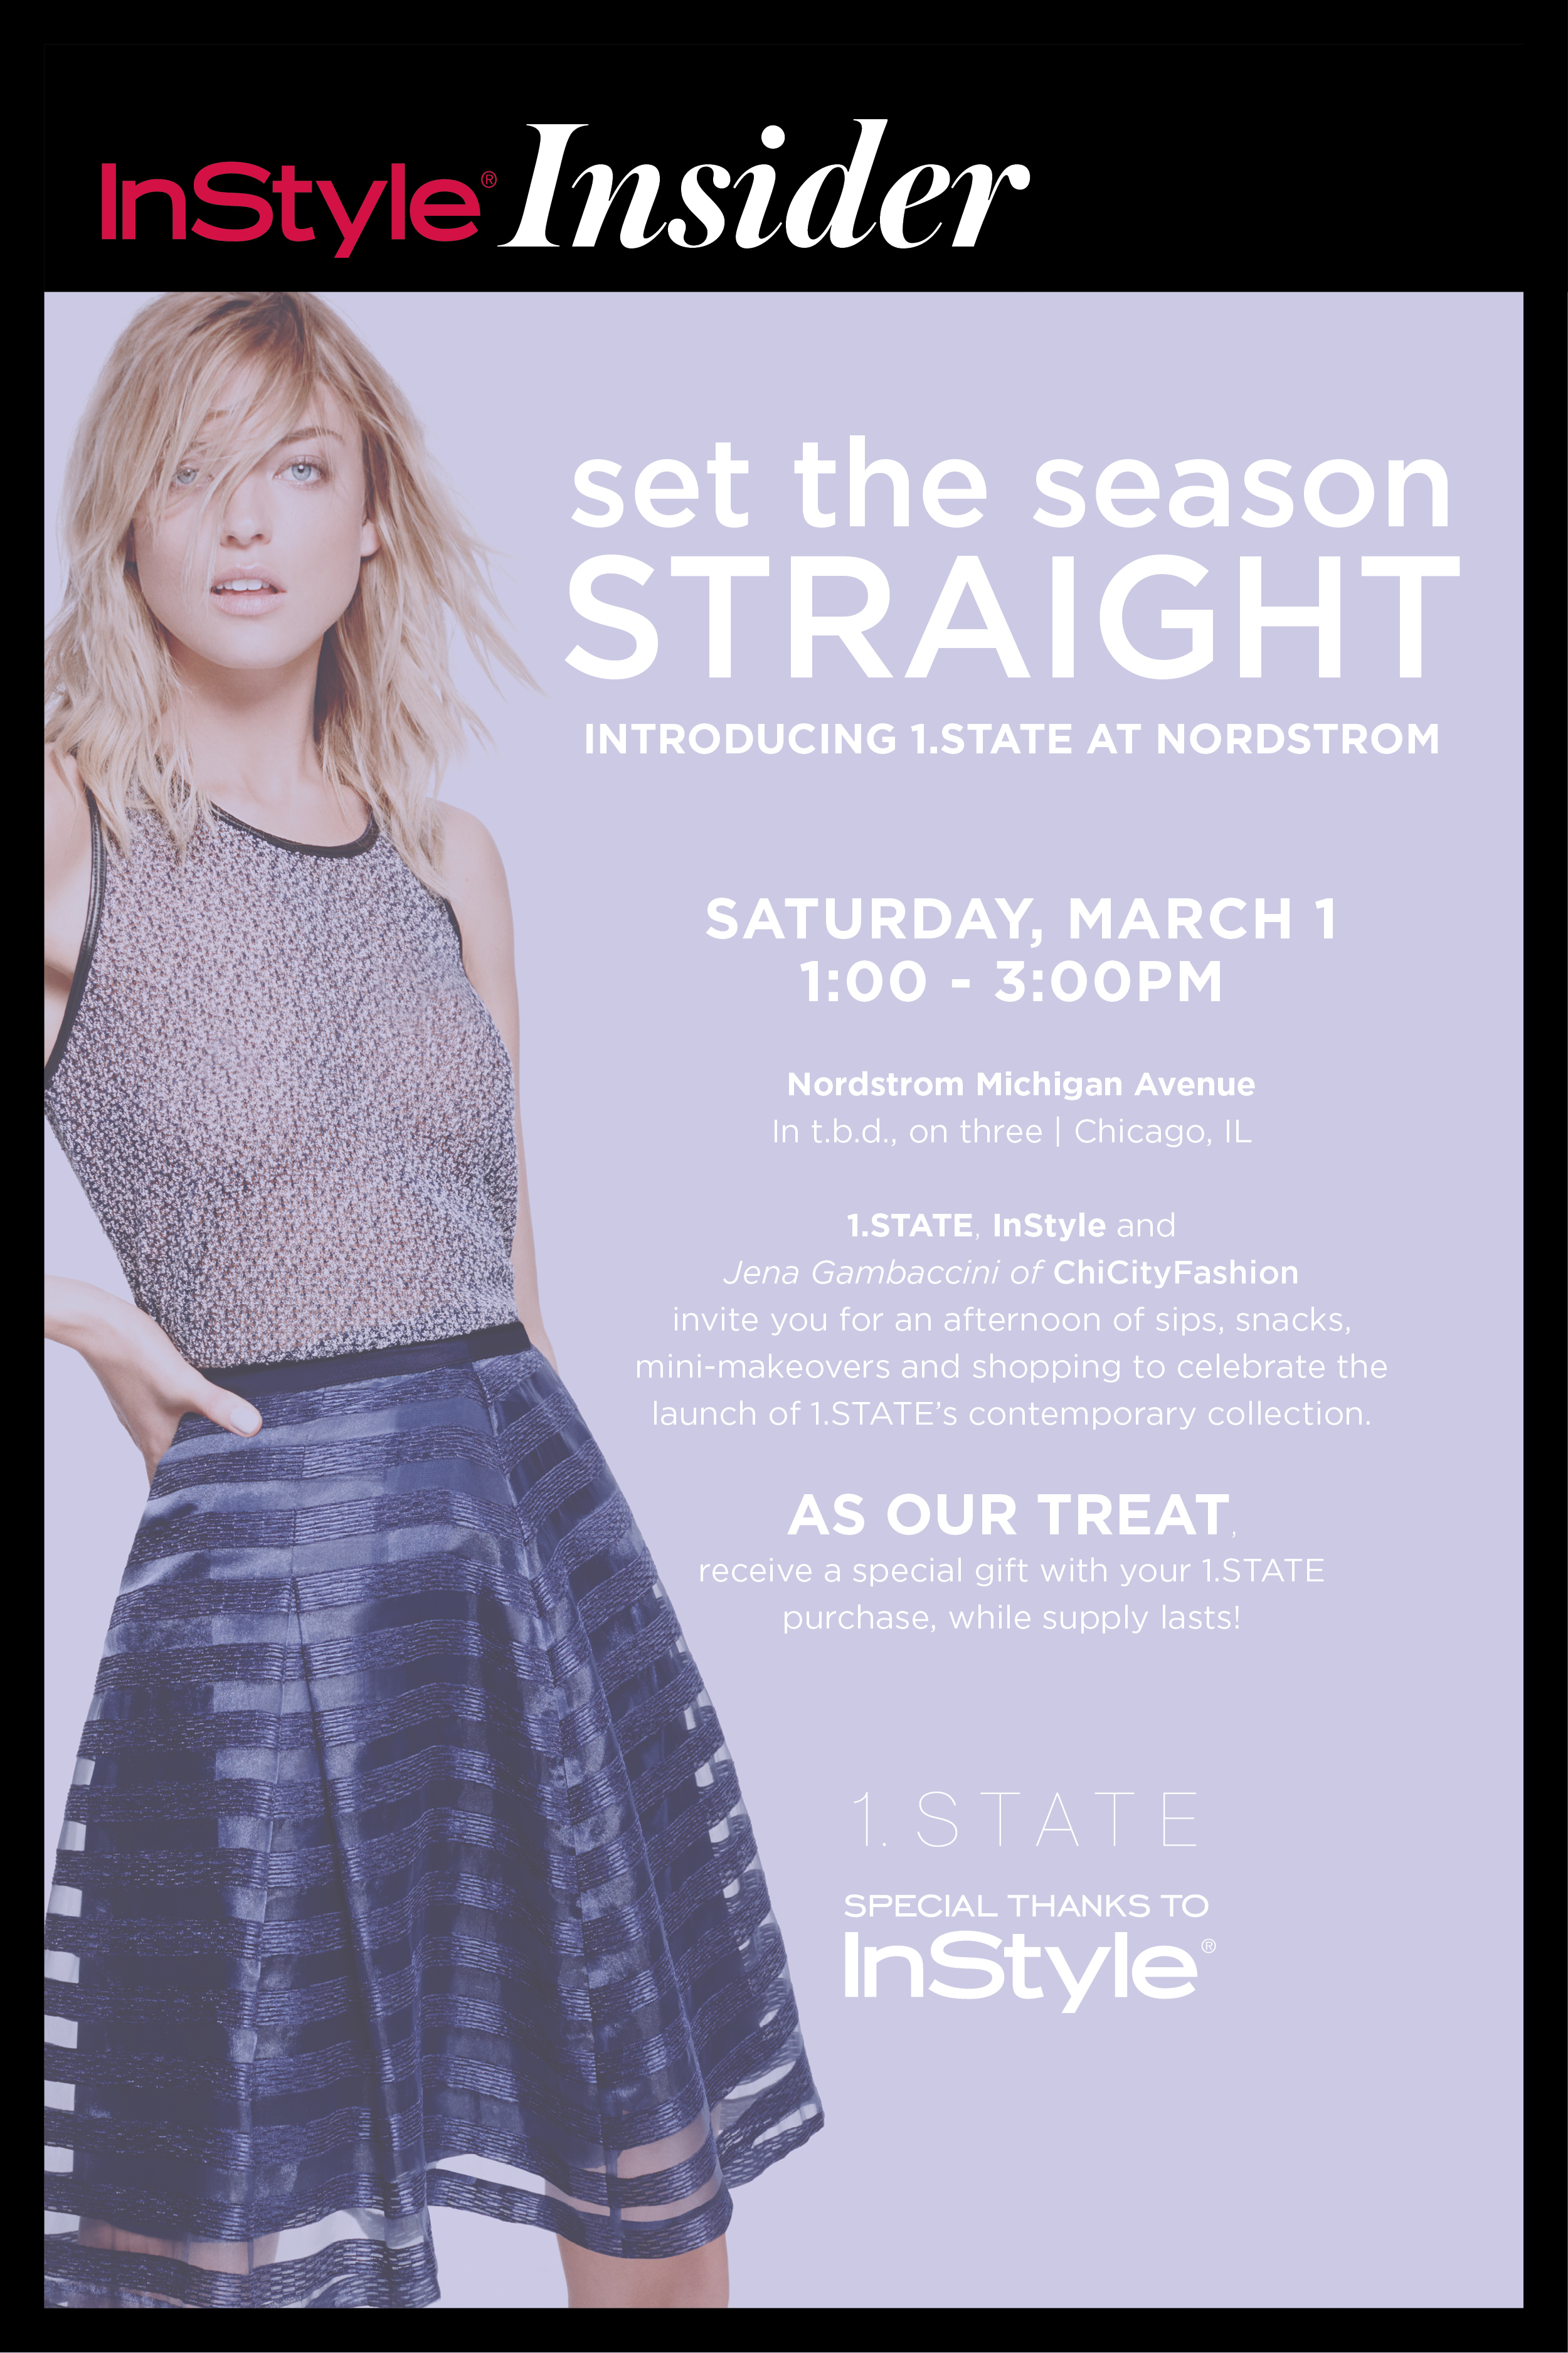 InStyle Insider Event  …. The Launch Of 1.State At Nordstrom